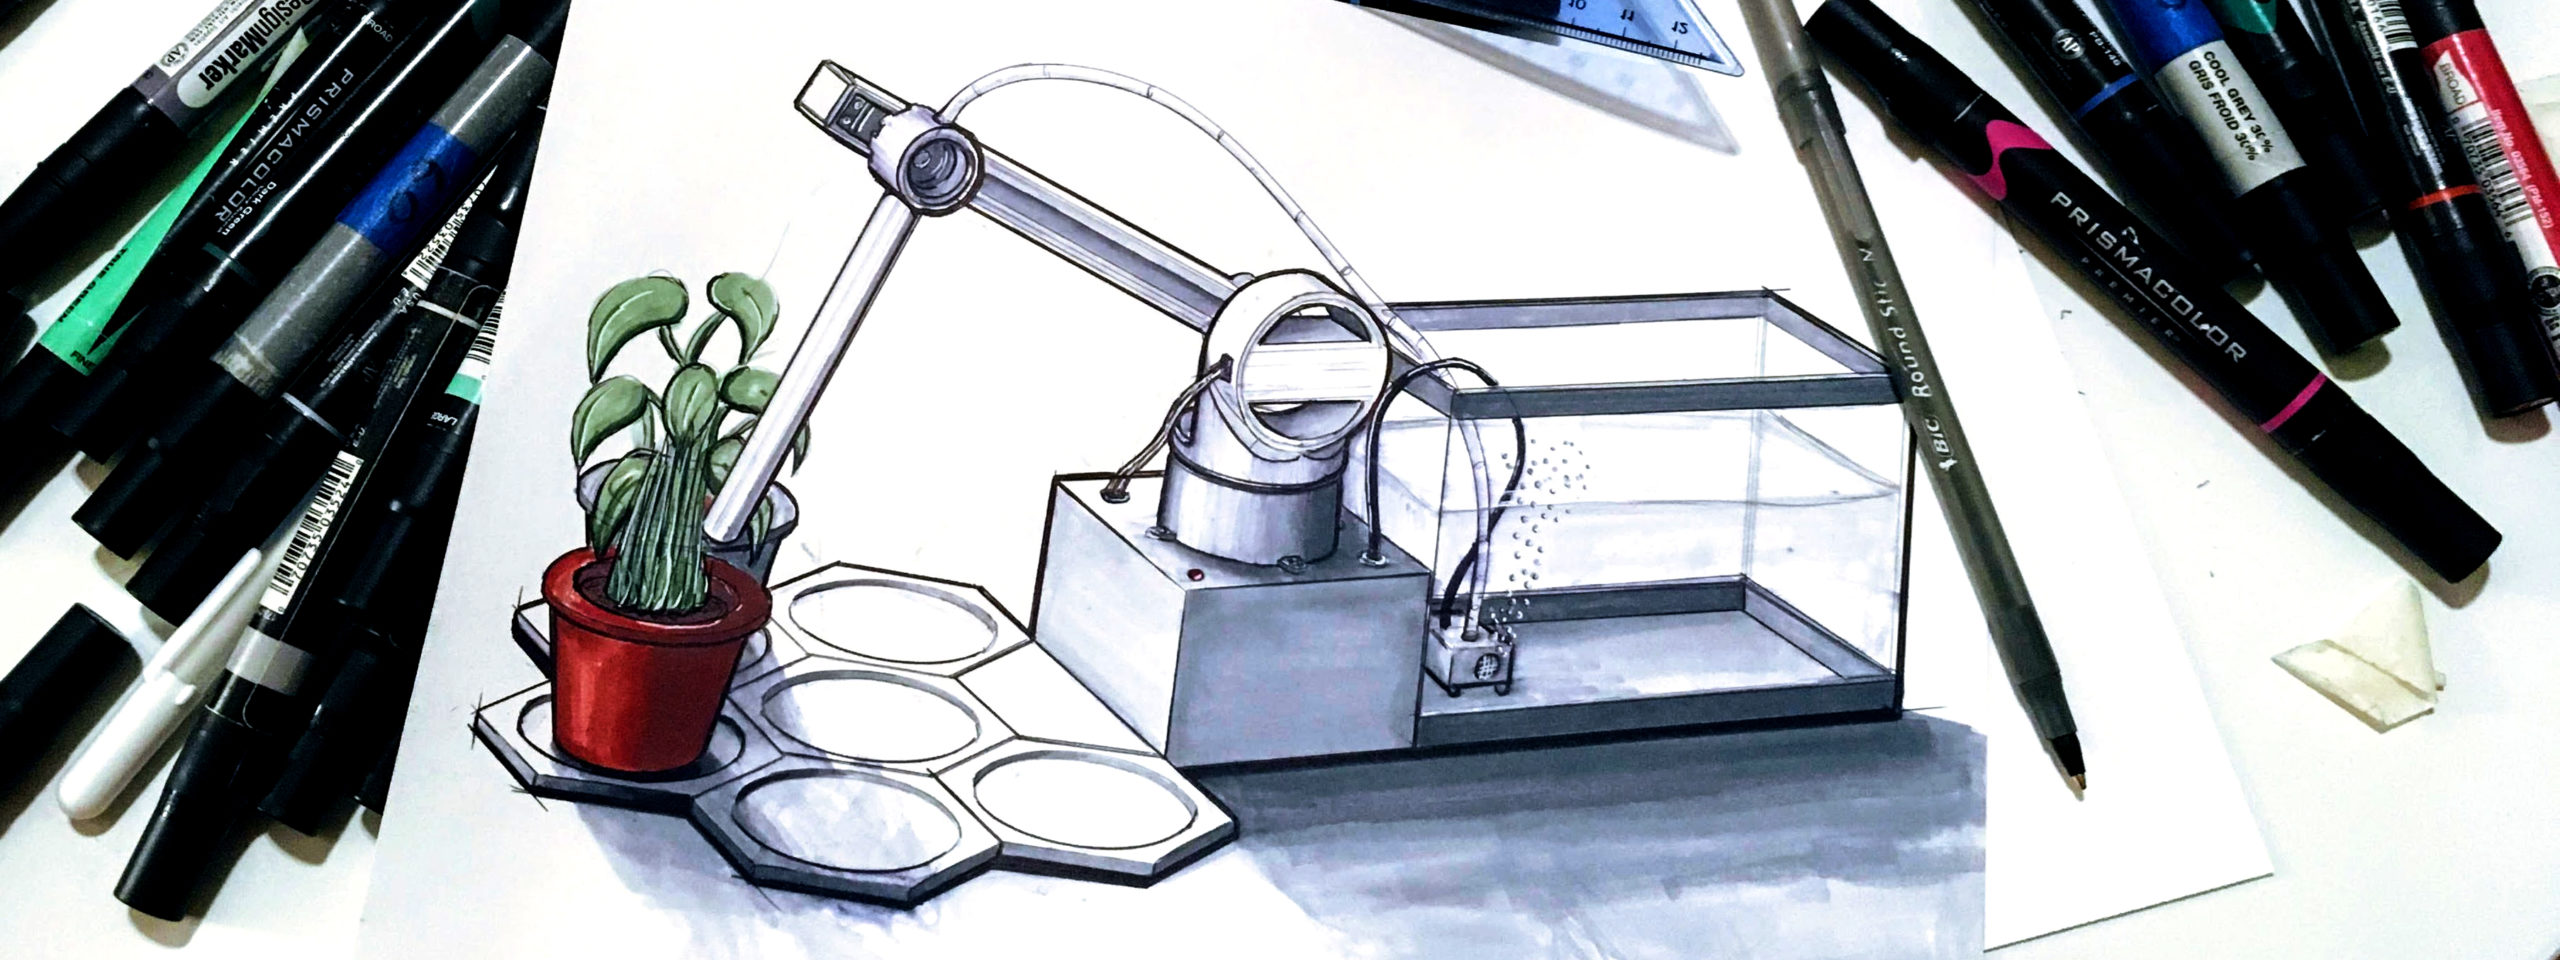 Image showing an Industrial Design styled sketch by Aaron Sherman